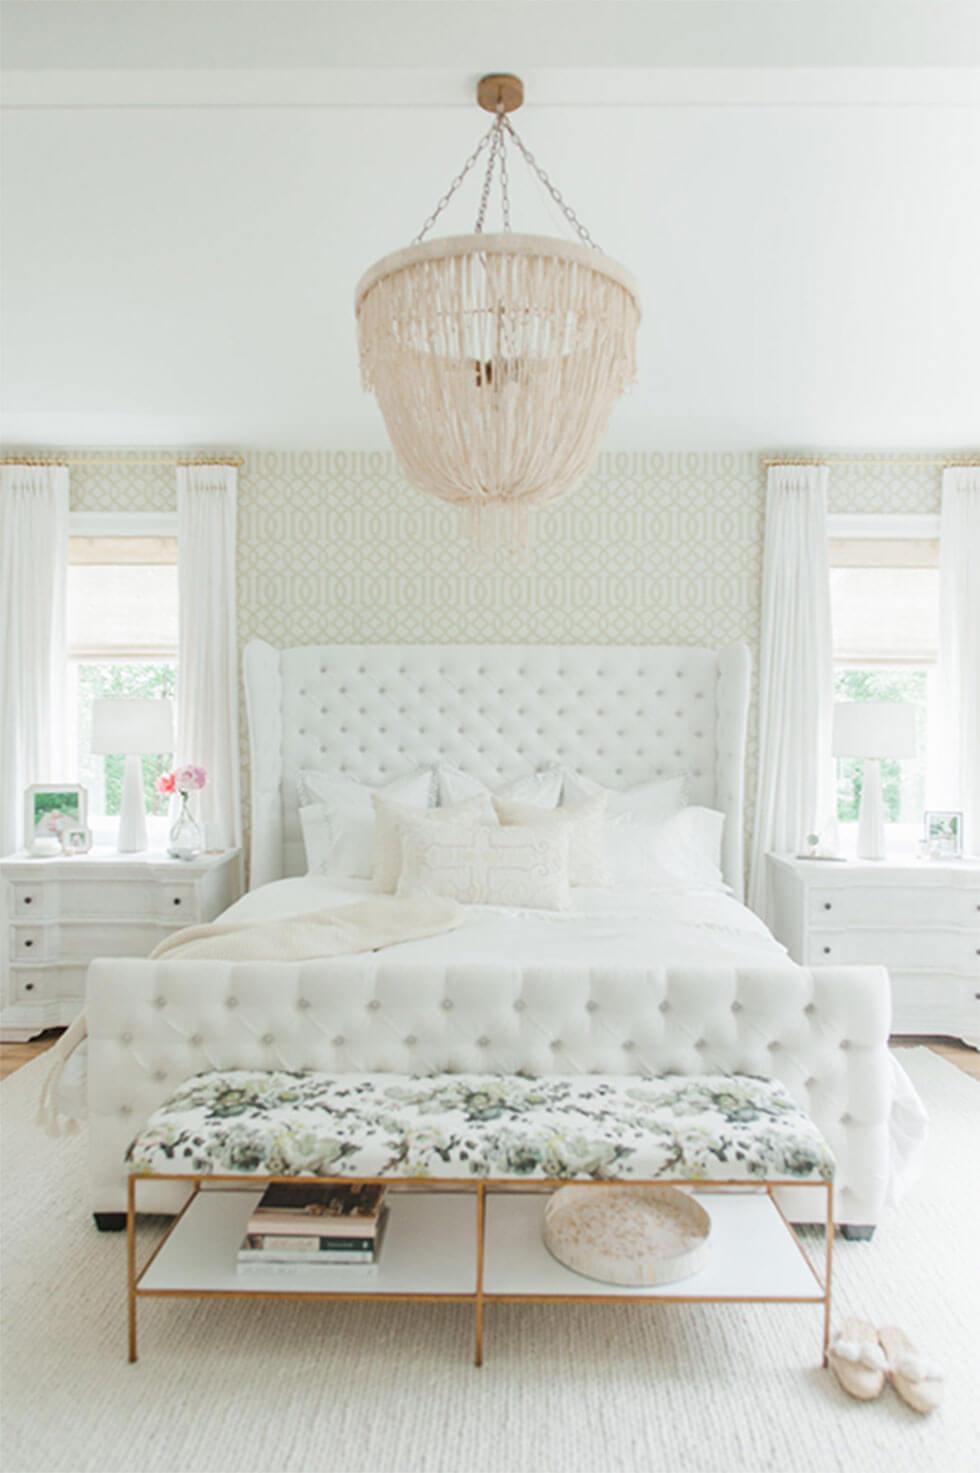 All-white bedroom with tufted headboard and beaded chandelier.